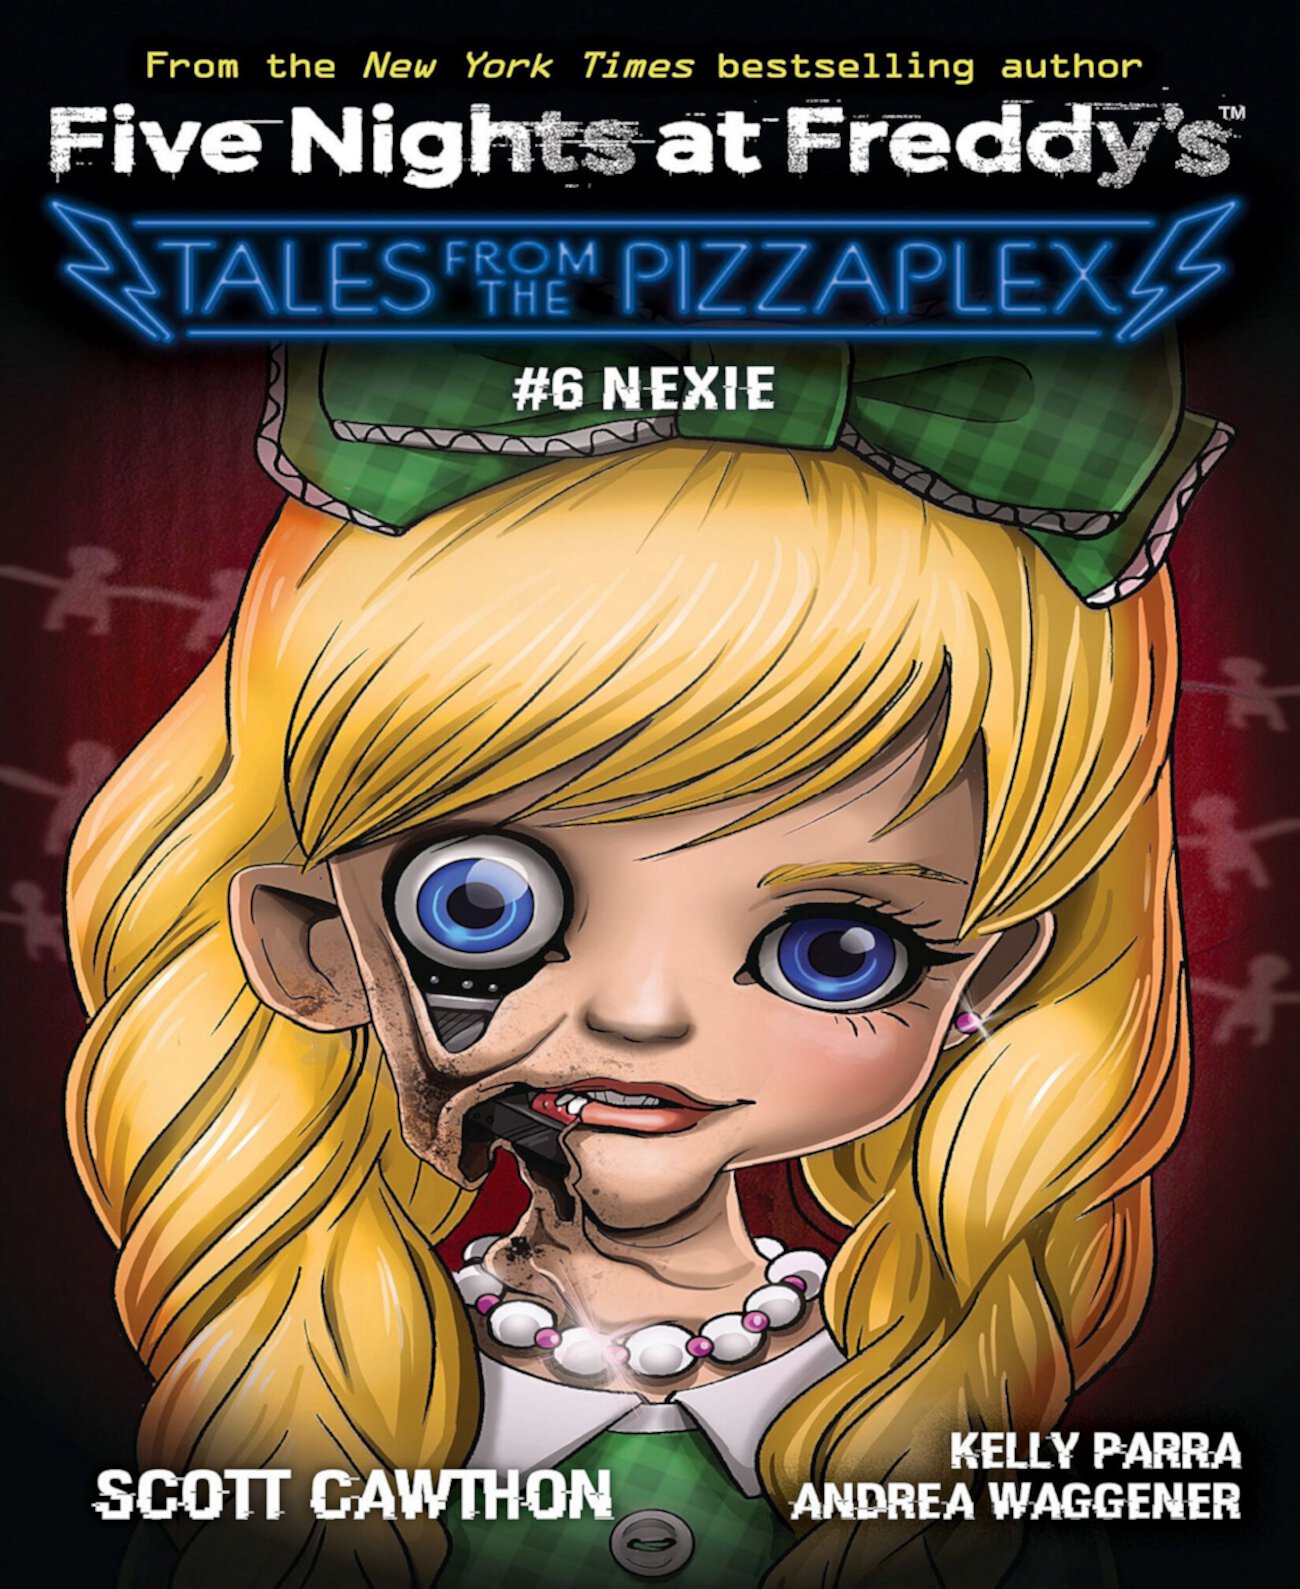 Scott Cawthon-Nexie: An AFK Book Five Nights at Freddy's:Tales from the Pizzaplex 6 Readerlink